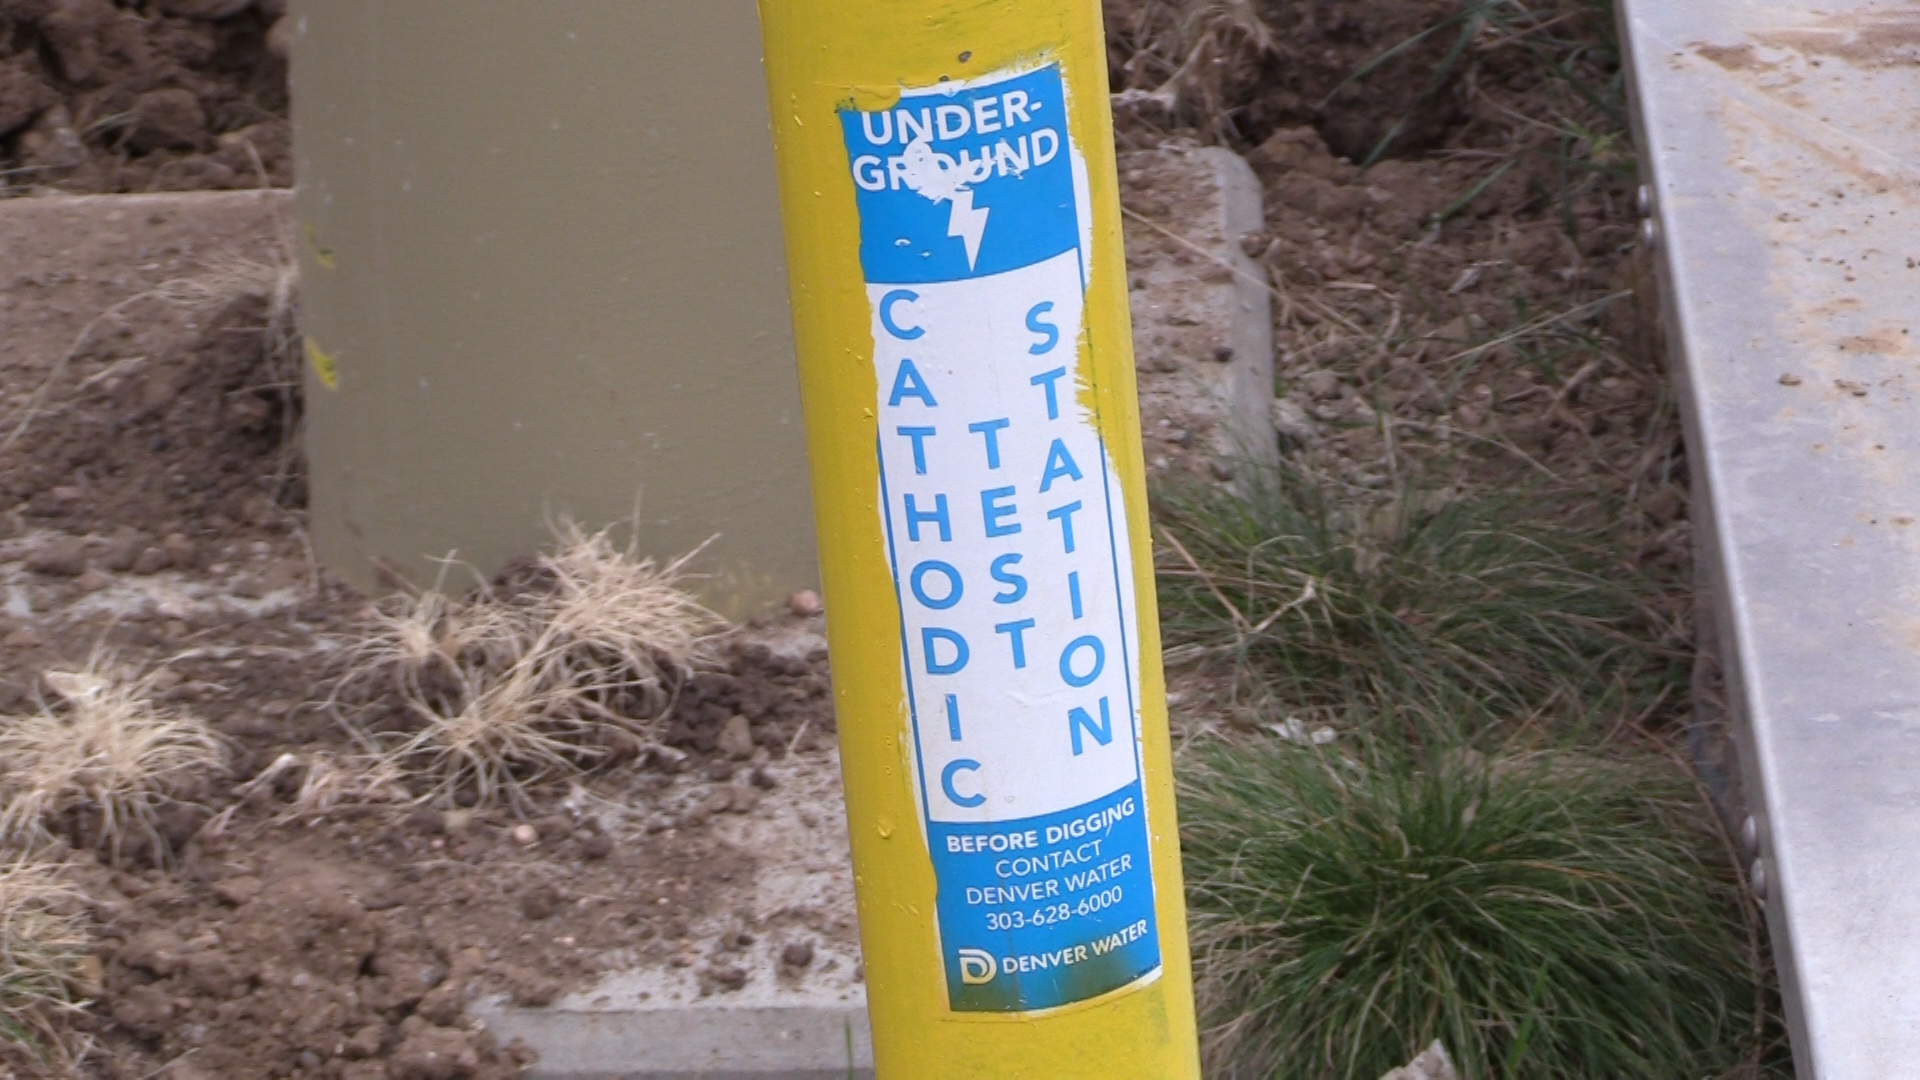 A yellow pipe sticks out of the ground with a blue and white sticker indicating that the its a cathodic test station for Denver Water.